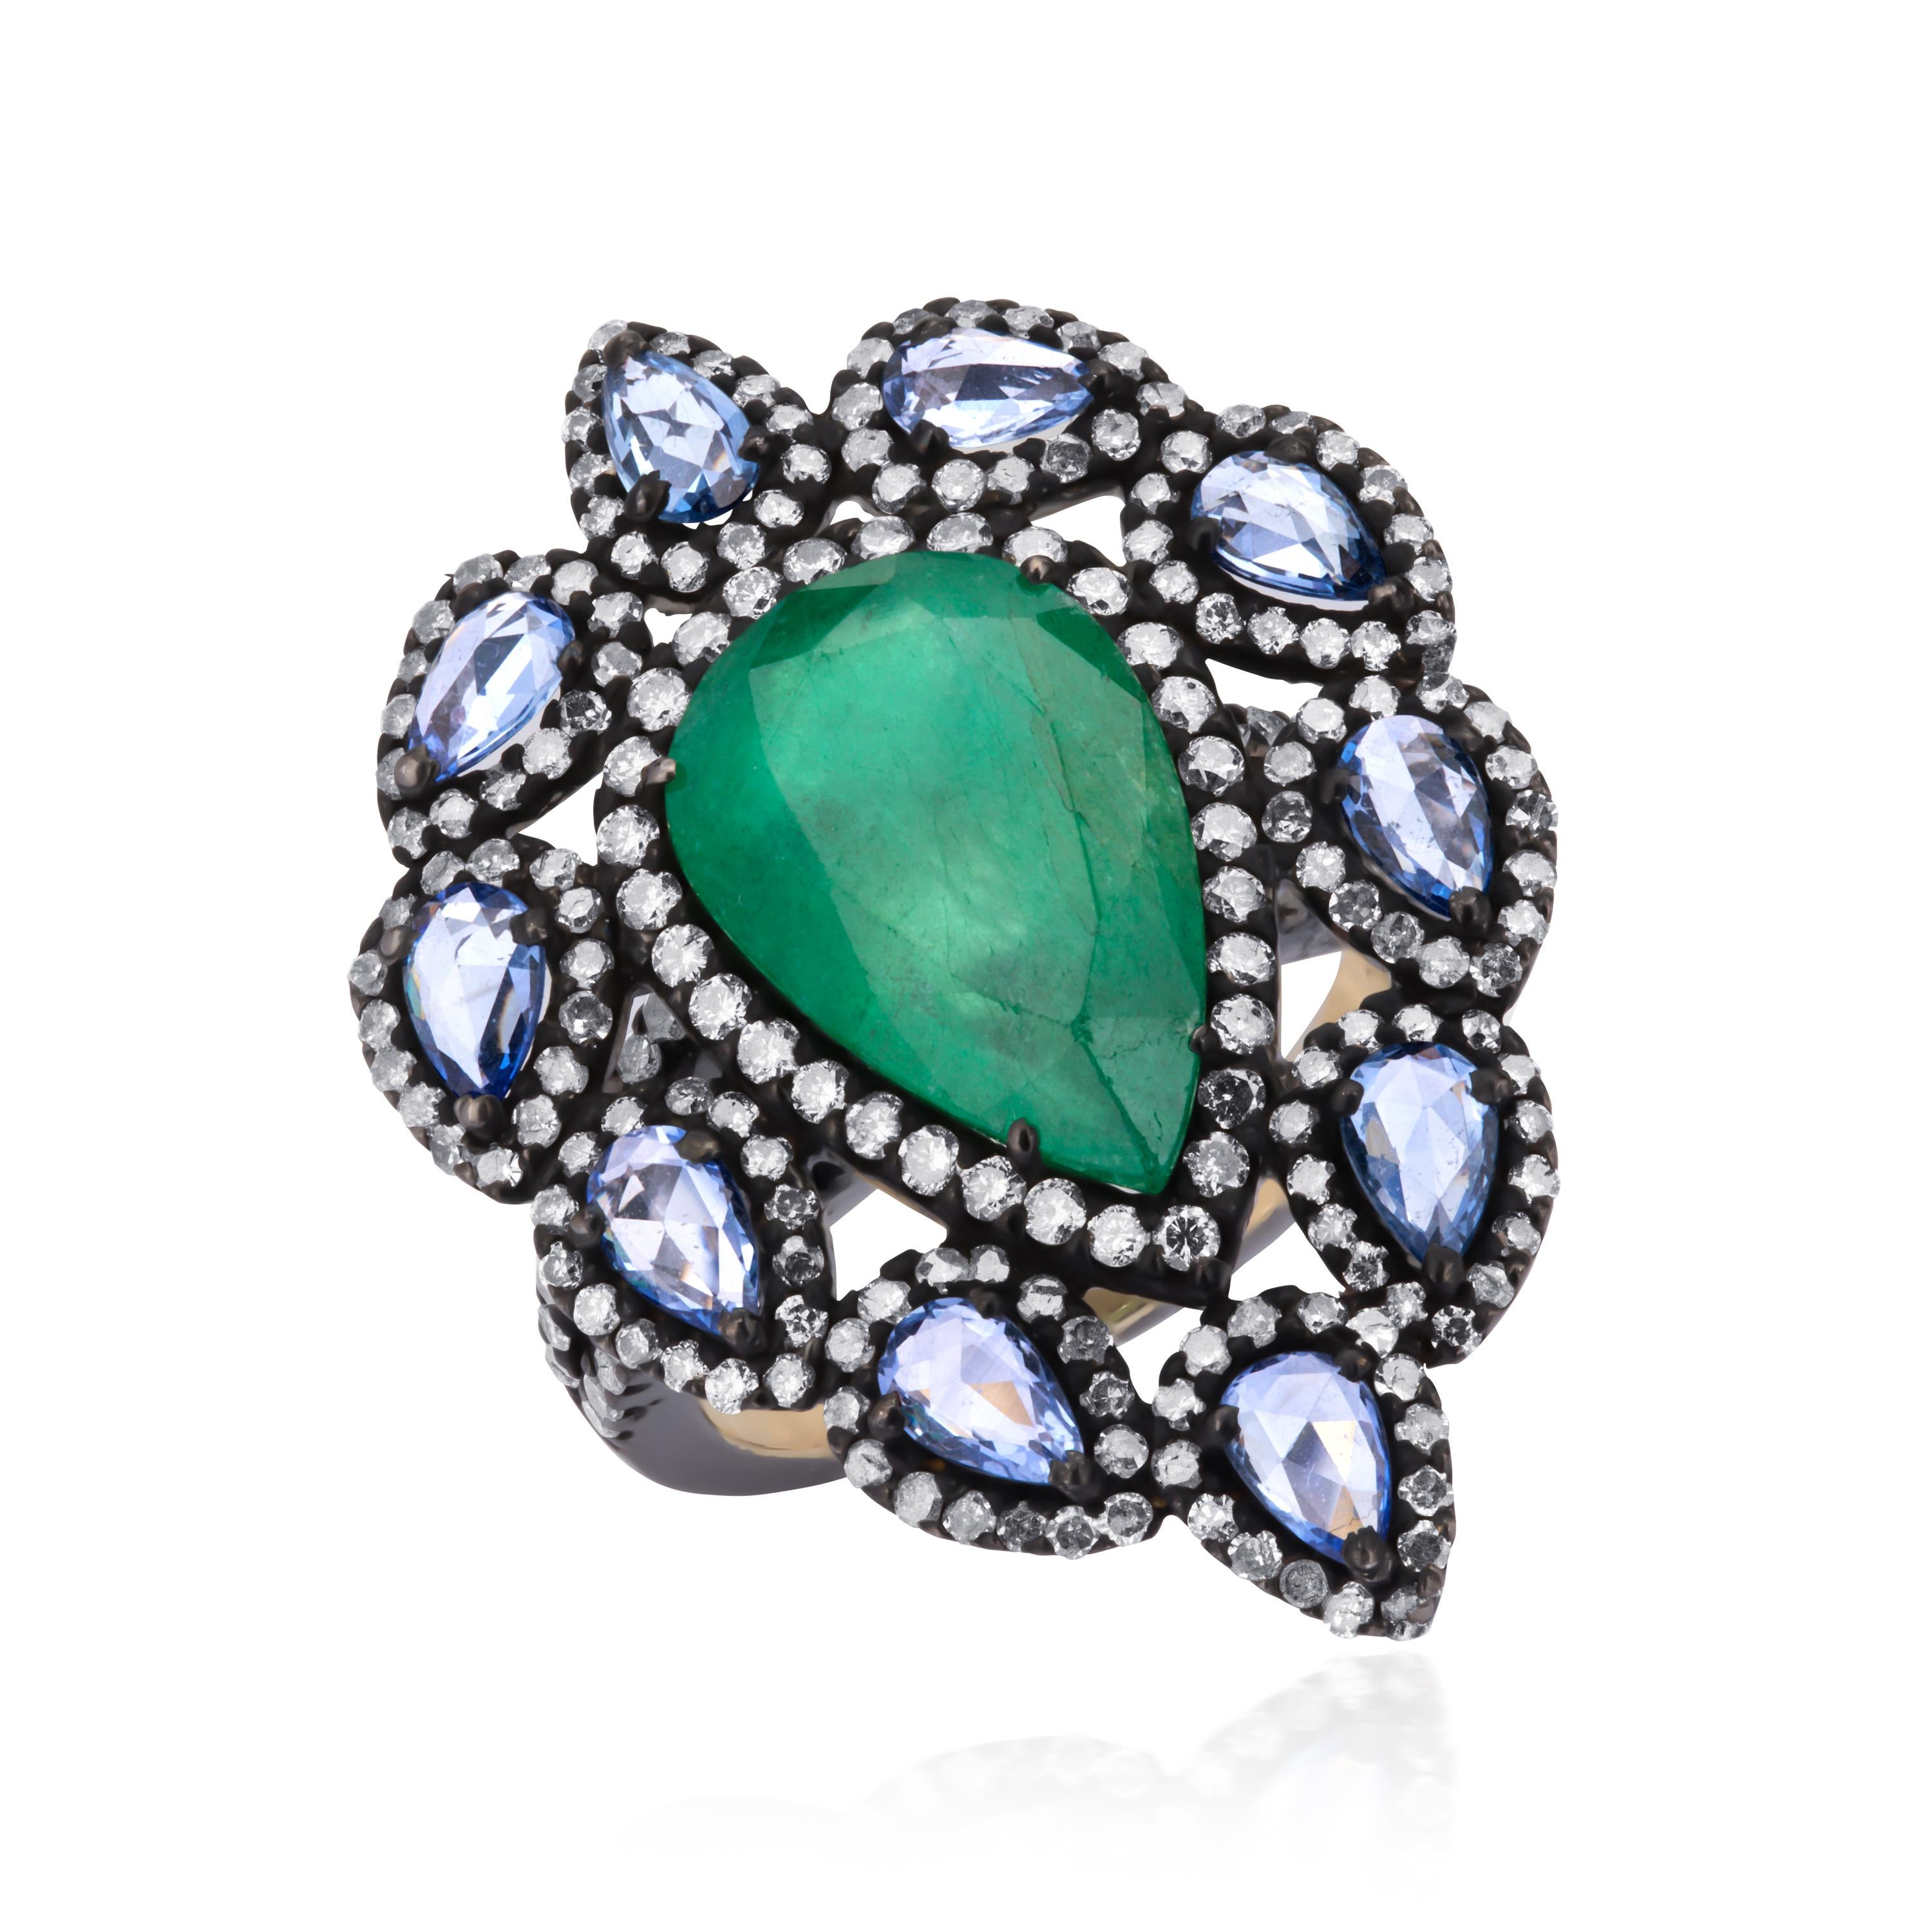 This classic Victorian jewel, hand fabricated in 18K gold and 925 sterling silver, features a vibrant pear cut emerald, weighing 5.44 Cts at the center, surrounded by pear shaped frame of blue sapphires and diamonds. The center design sits